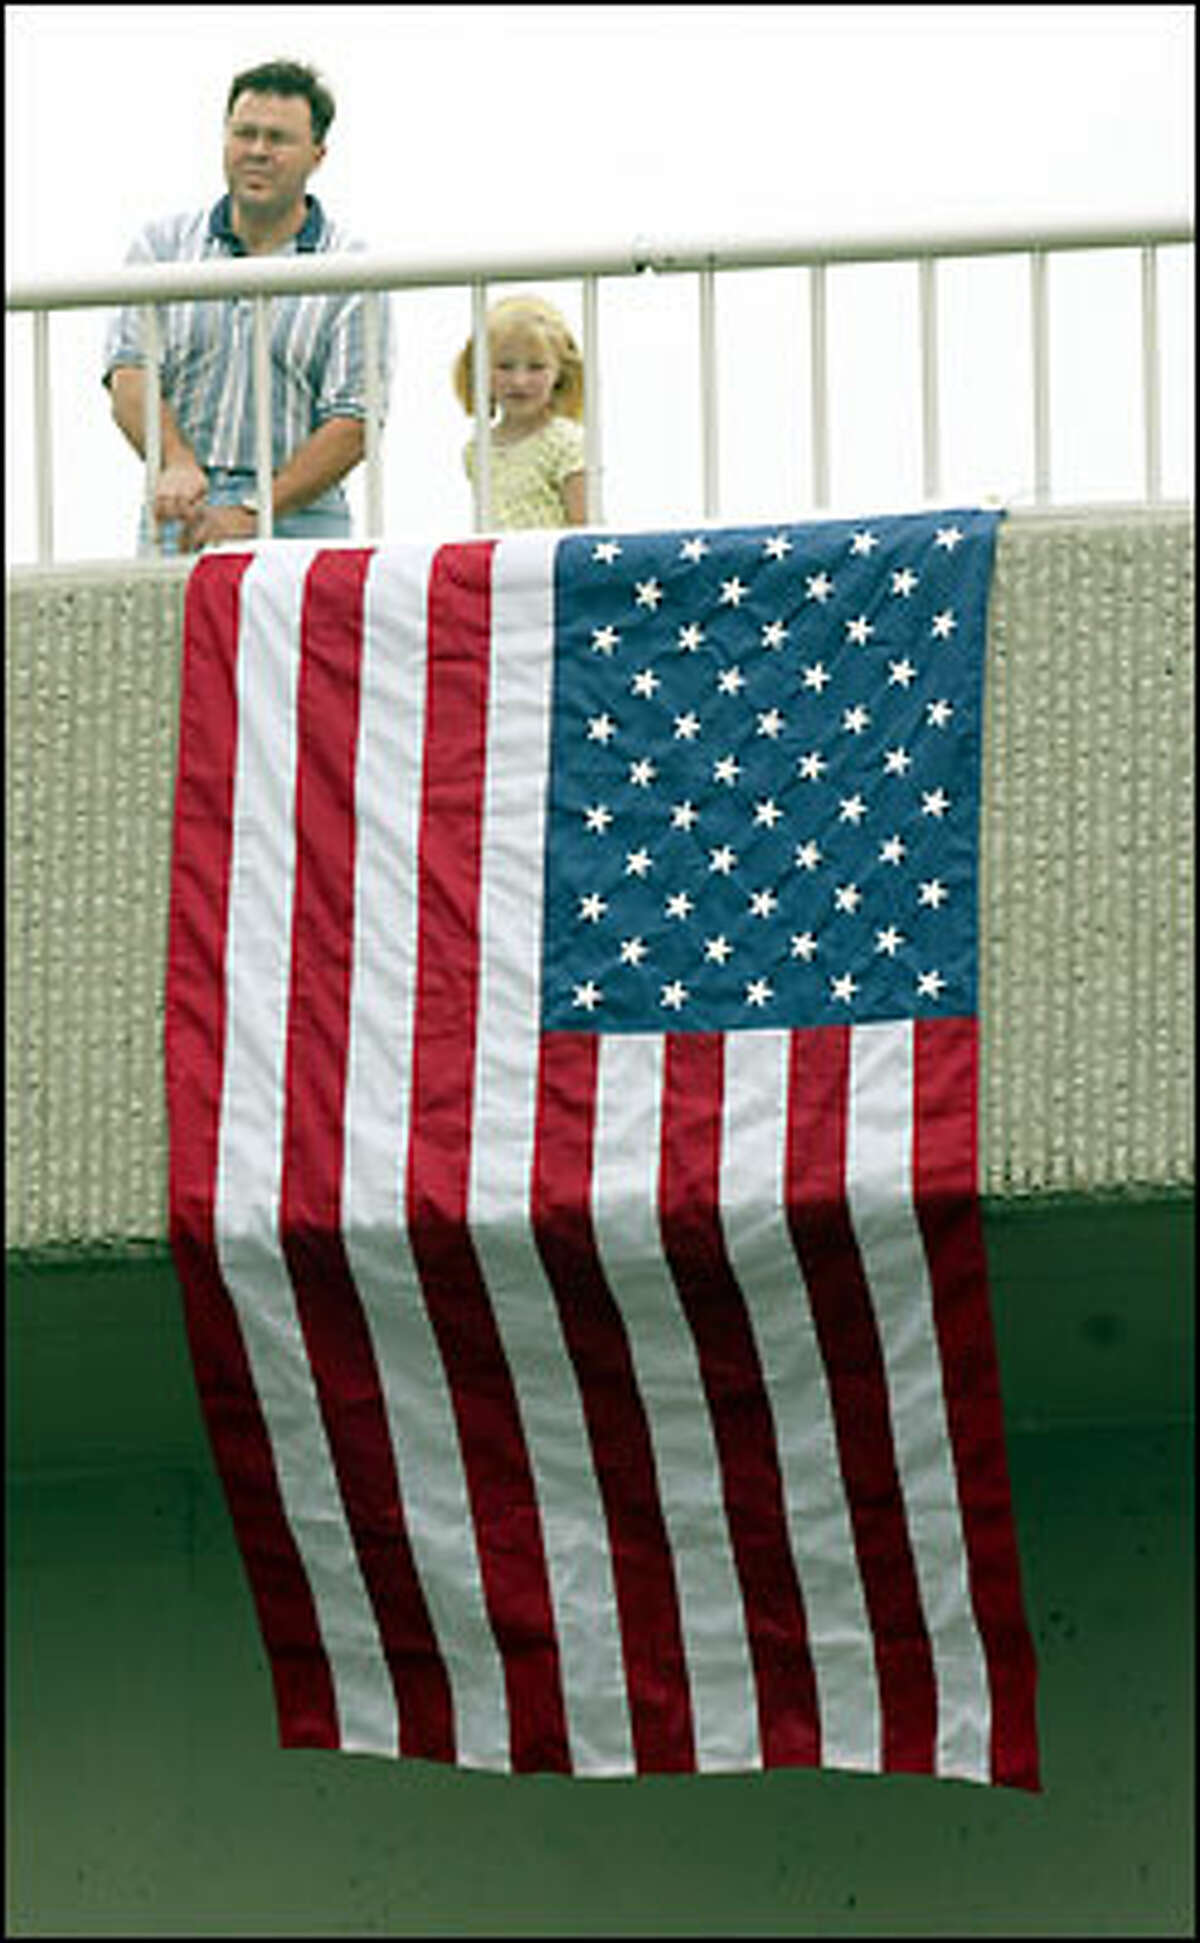 Rob Minor, of Covington, and his daughter Melissa raised a flag on the Covington Way SE overpass near the scene of an accident that killed D.O.T. worker Jake Baardson last week on Highway 18. About 150 vehicles made their way convoy-style from Baardson's memorial service in Kent to the site near Covington.